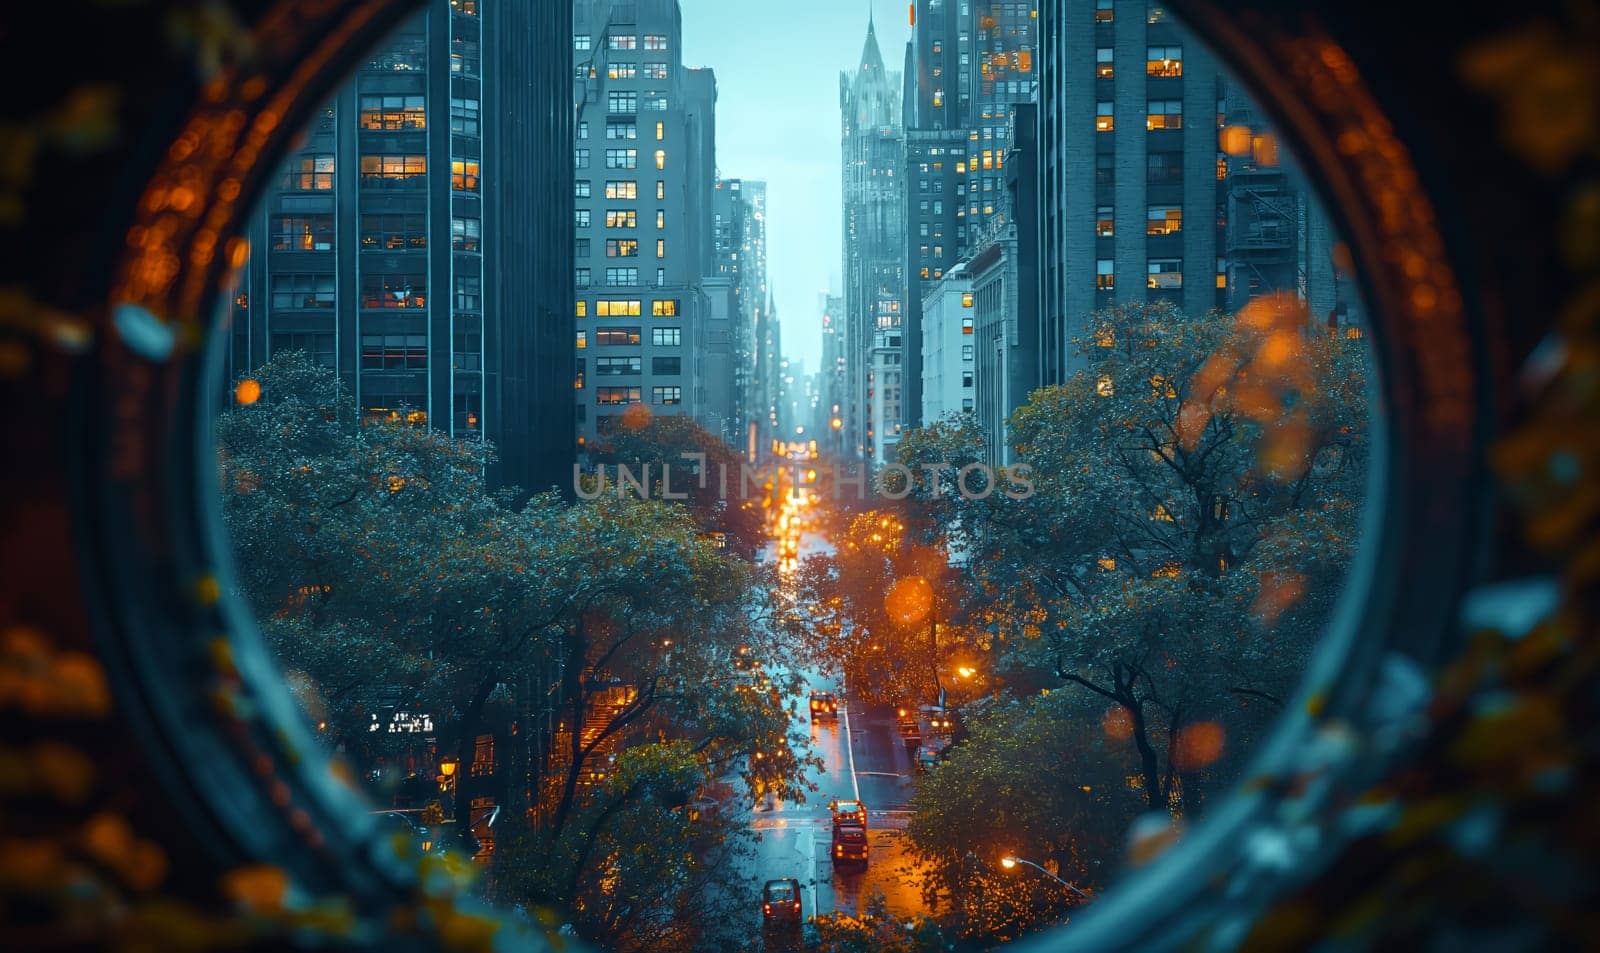 City View Through Magnifying Glass by Fischeron